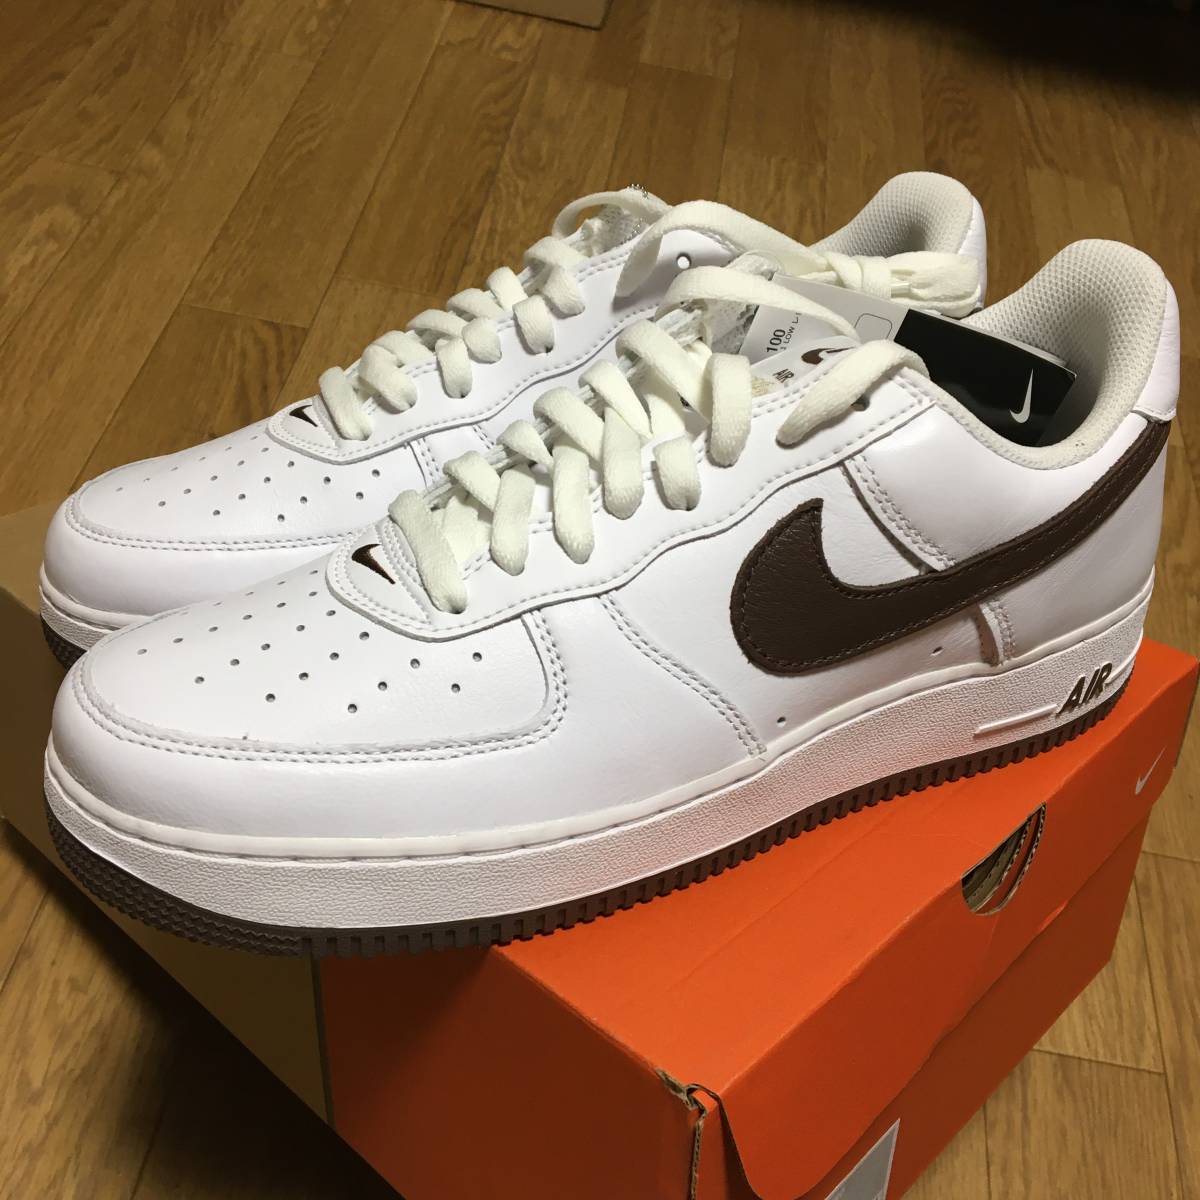 28cm NIKE AIR FORCE 1 LOW RETRO CHOCOLATE Color of the Month ナイキ エアフォース  チョコレート カラー オブ ザ マンス DM0576-100 AF1